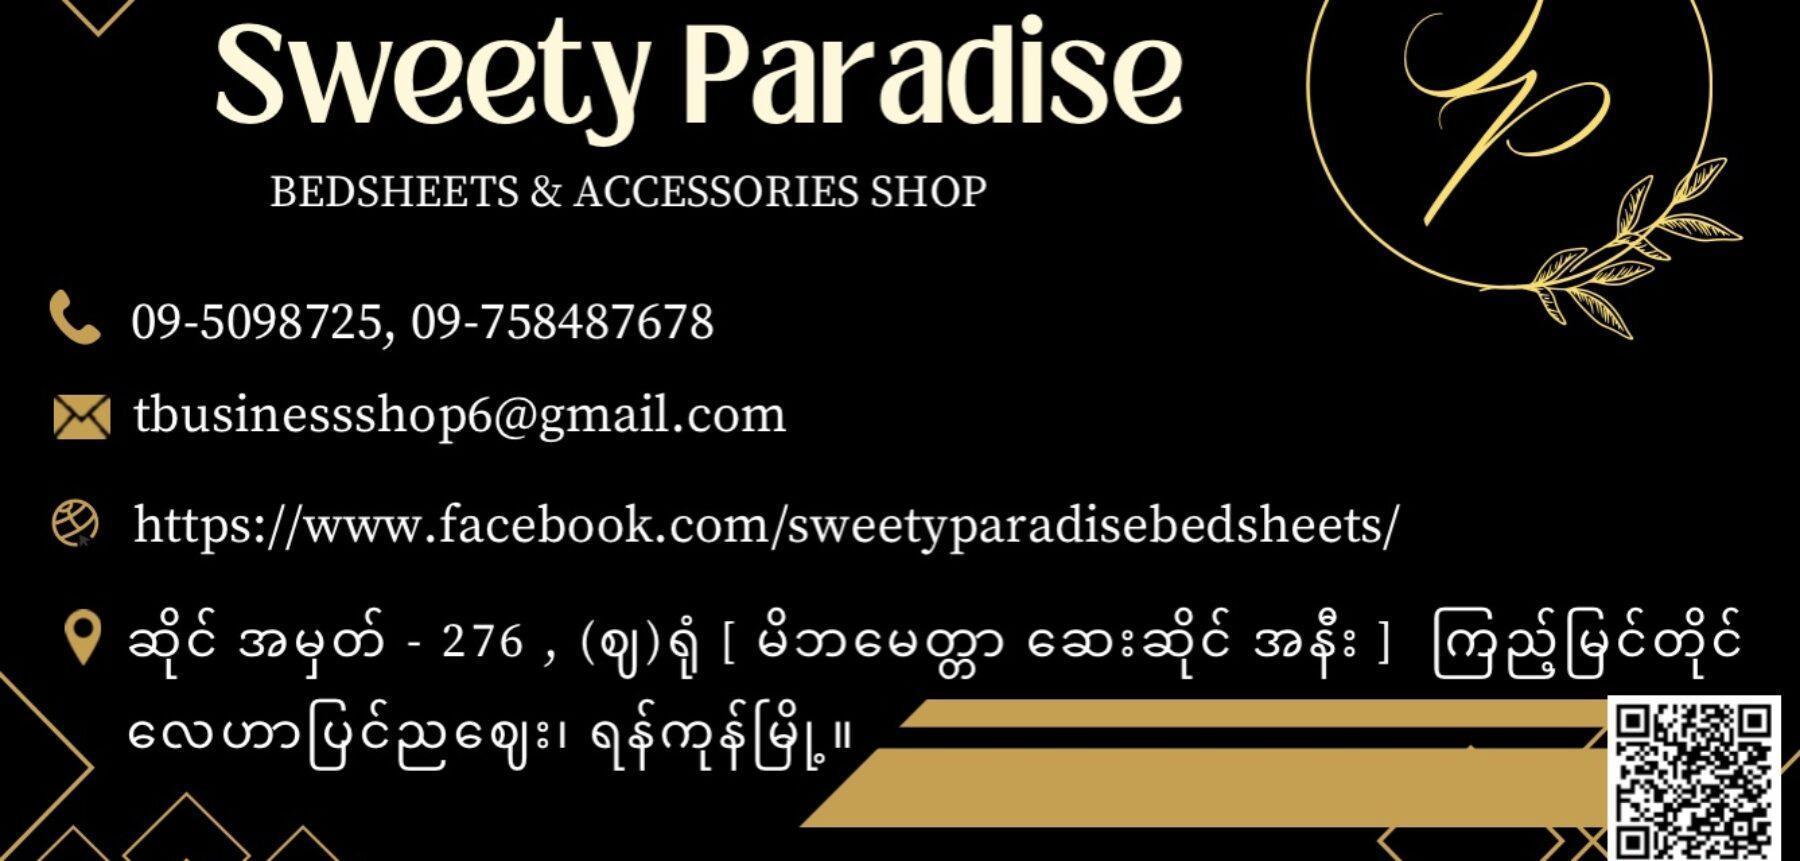 Sweety Paradise (Bedsheets & Accessories Shop)